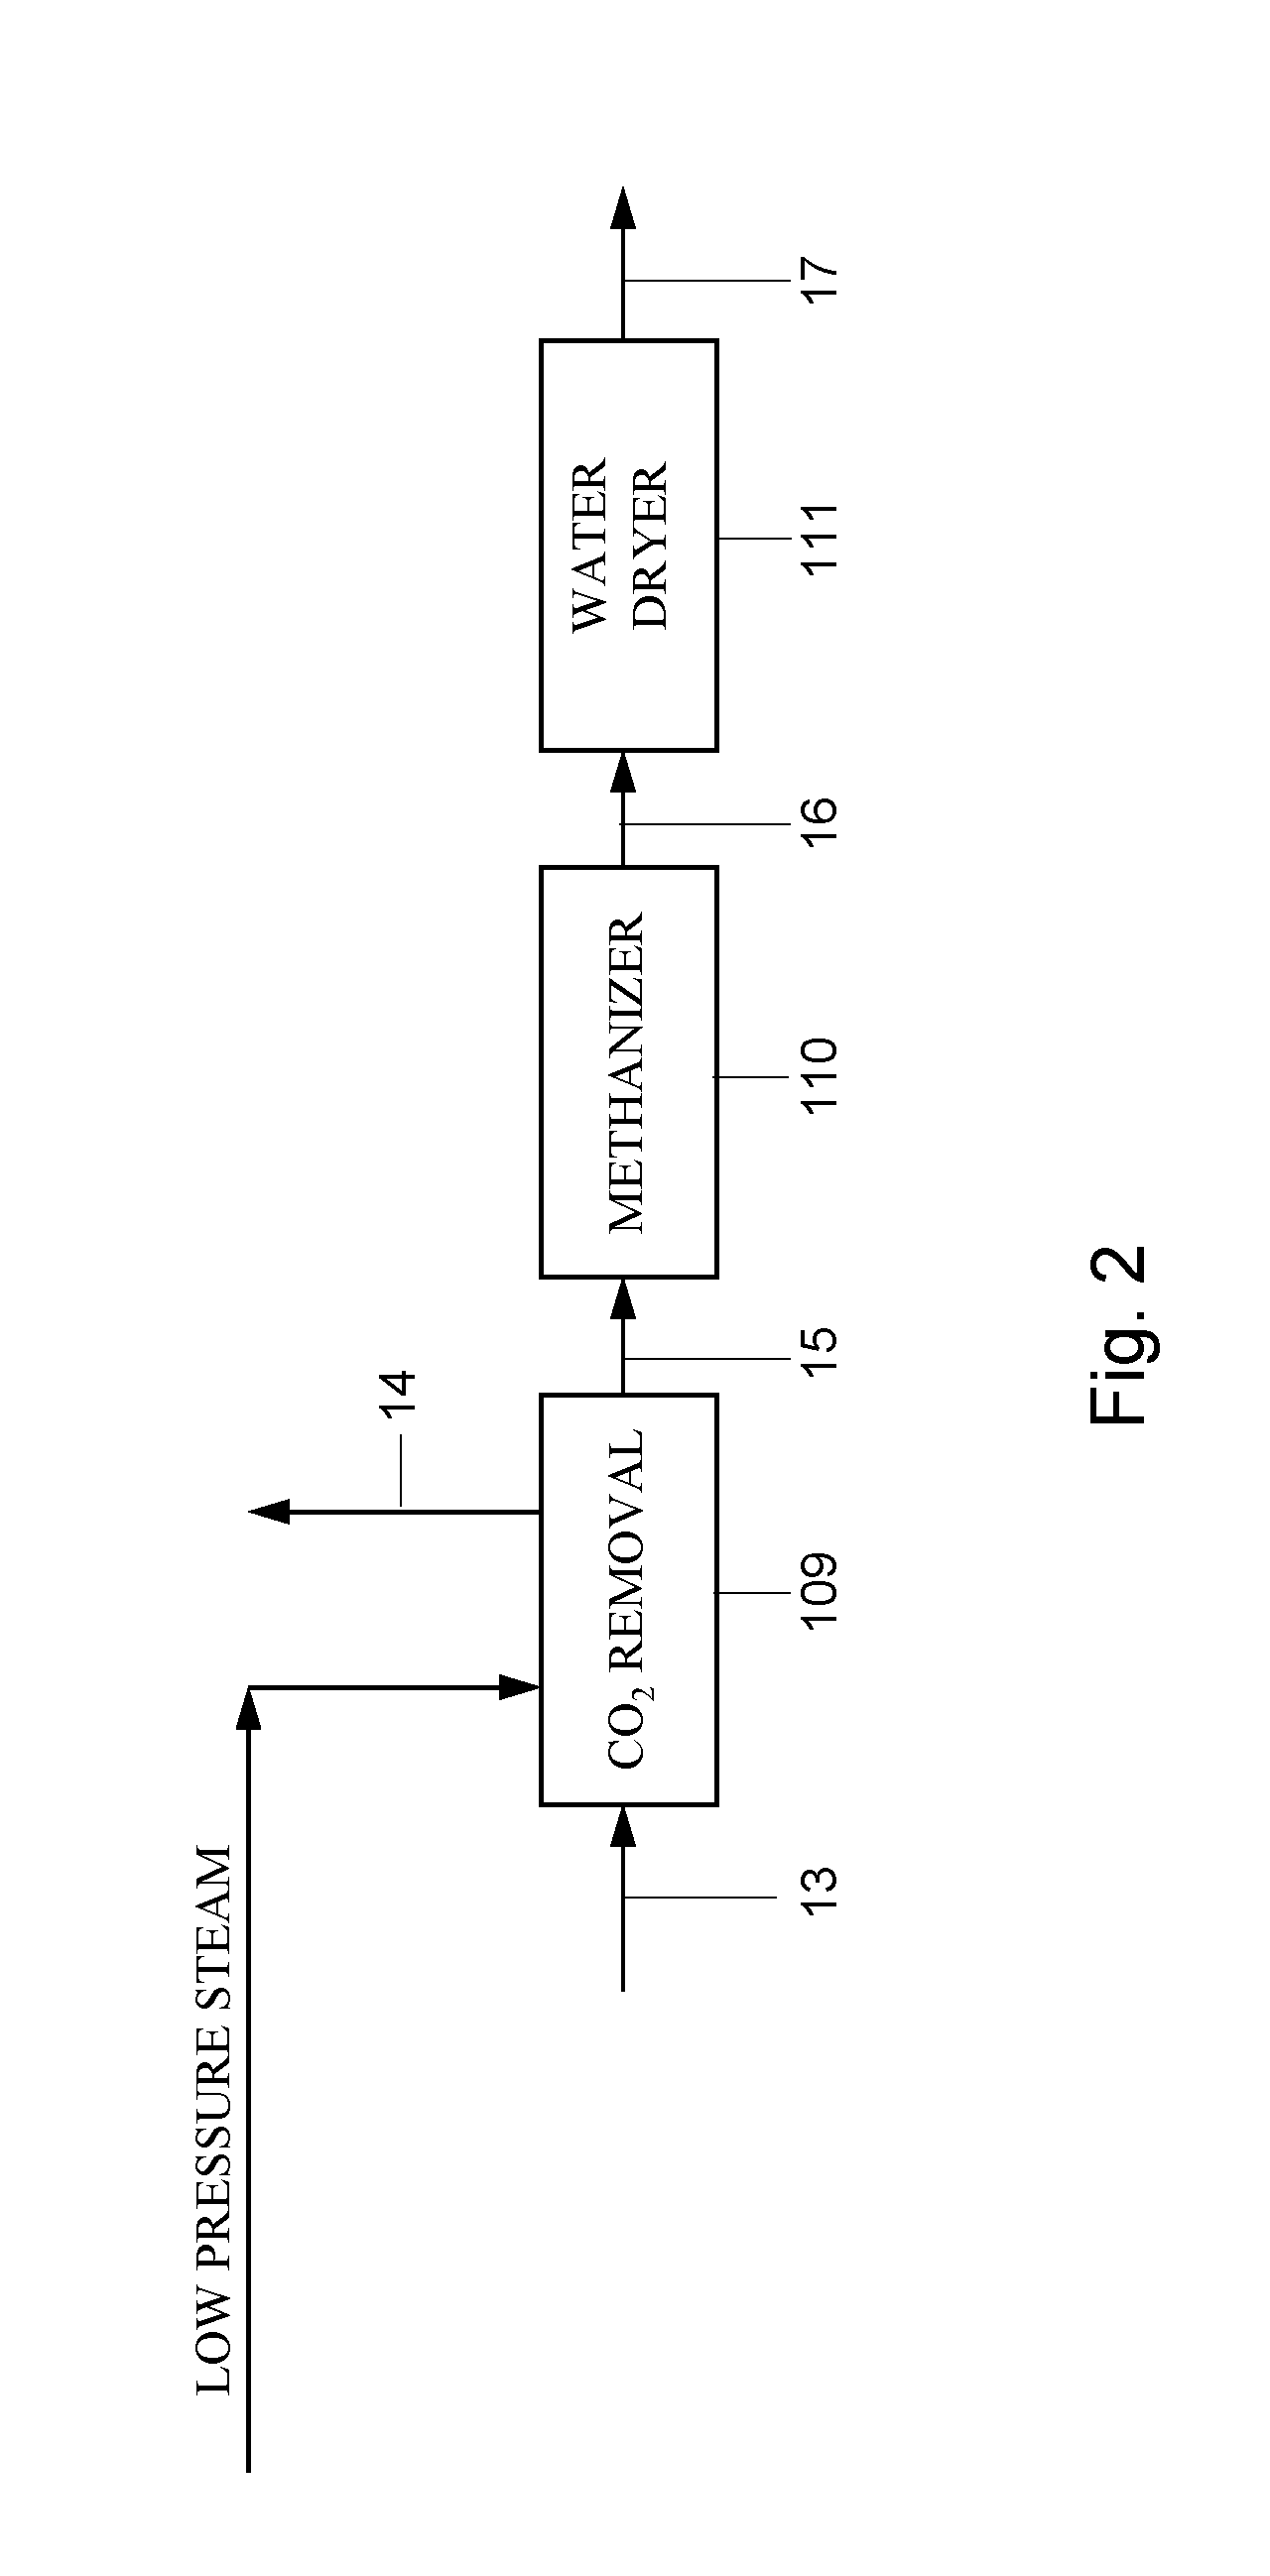 Process for producing a syngas intermediate suitable for the production of hydrogen